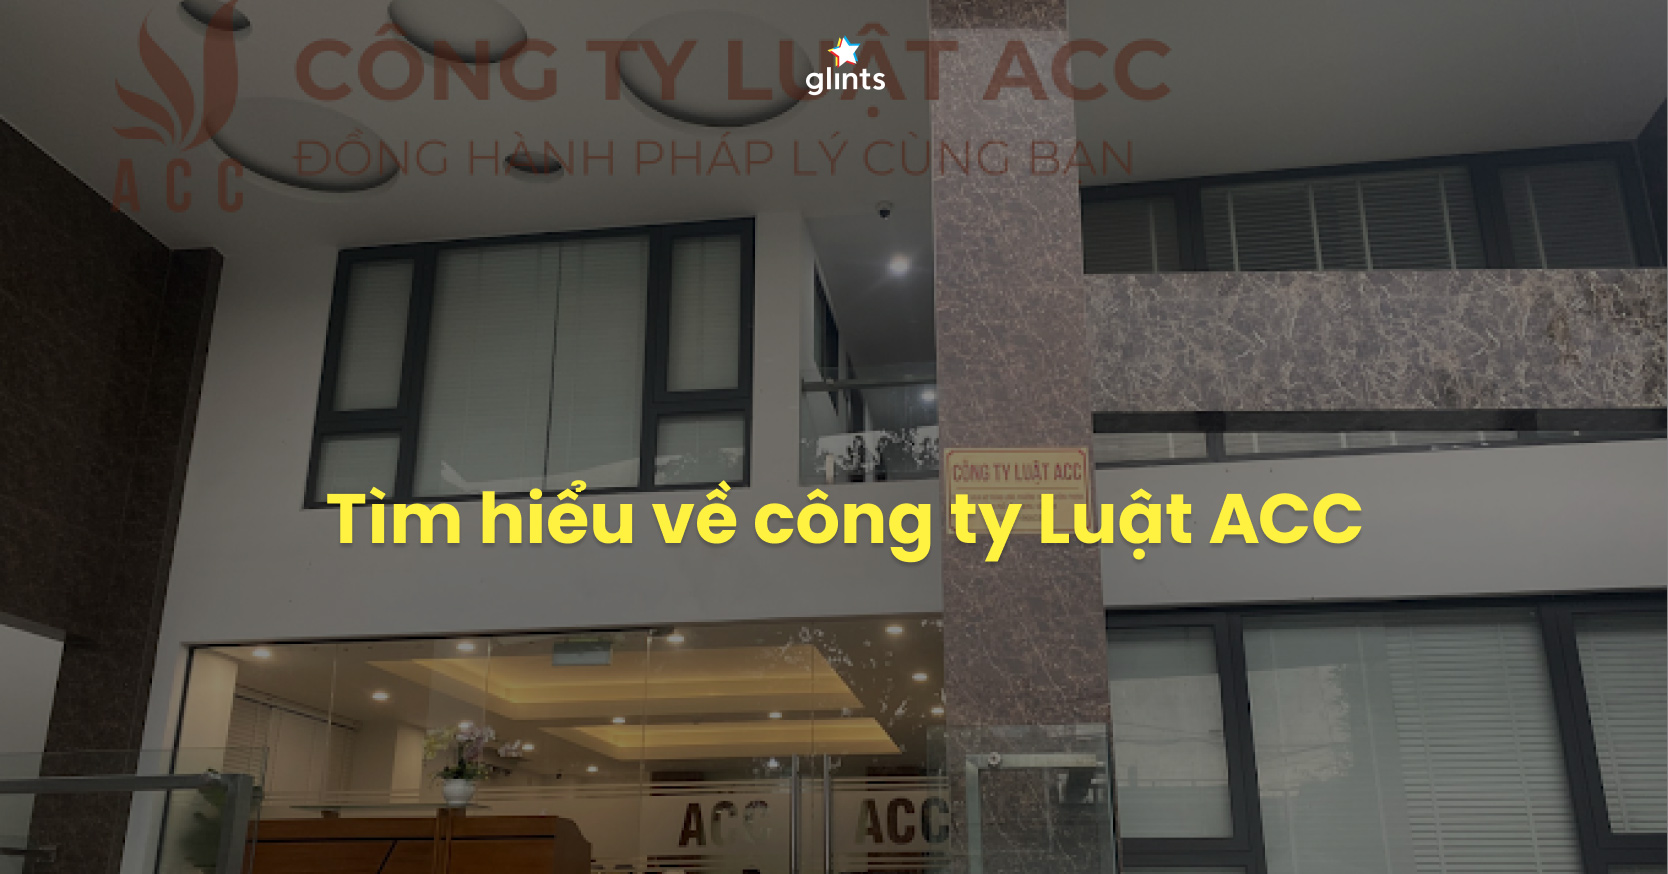 cong-ty-luat-acc